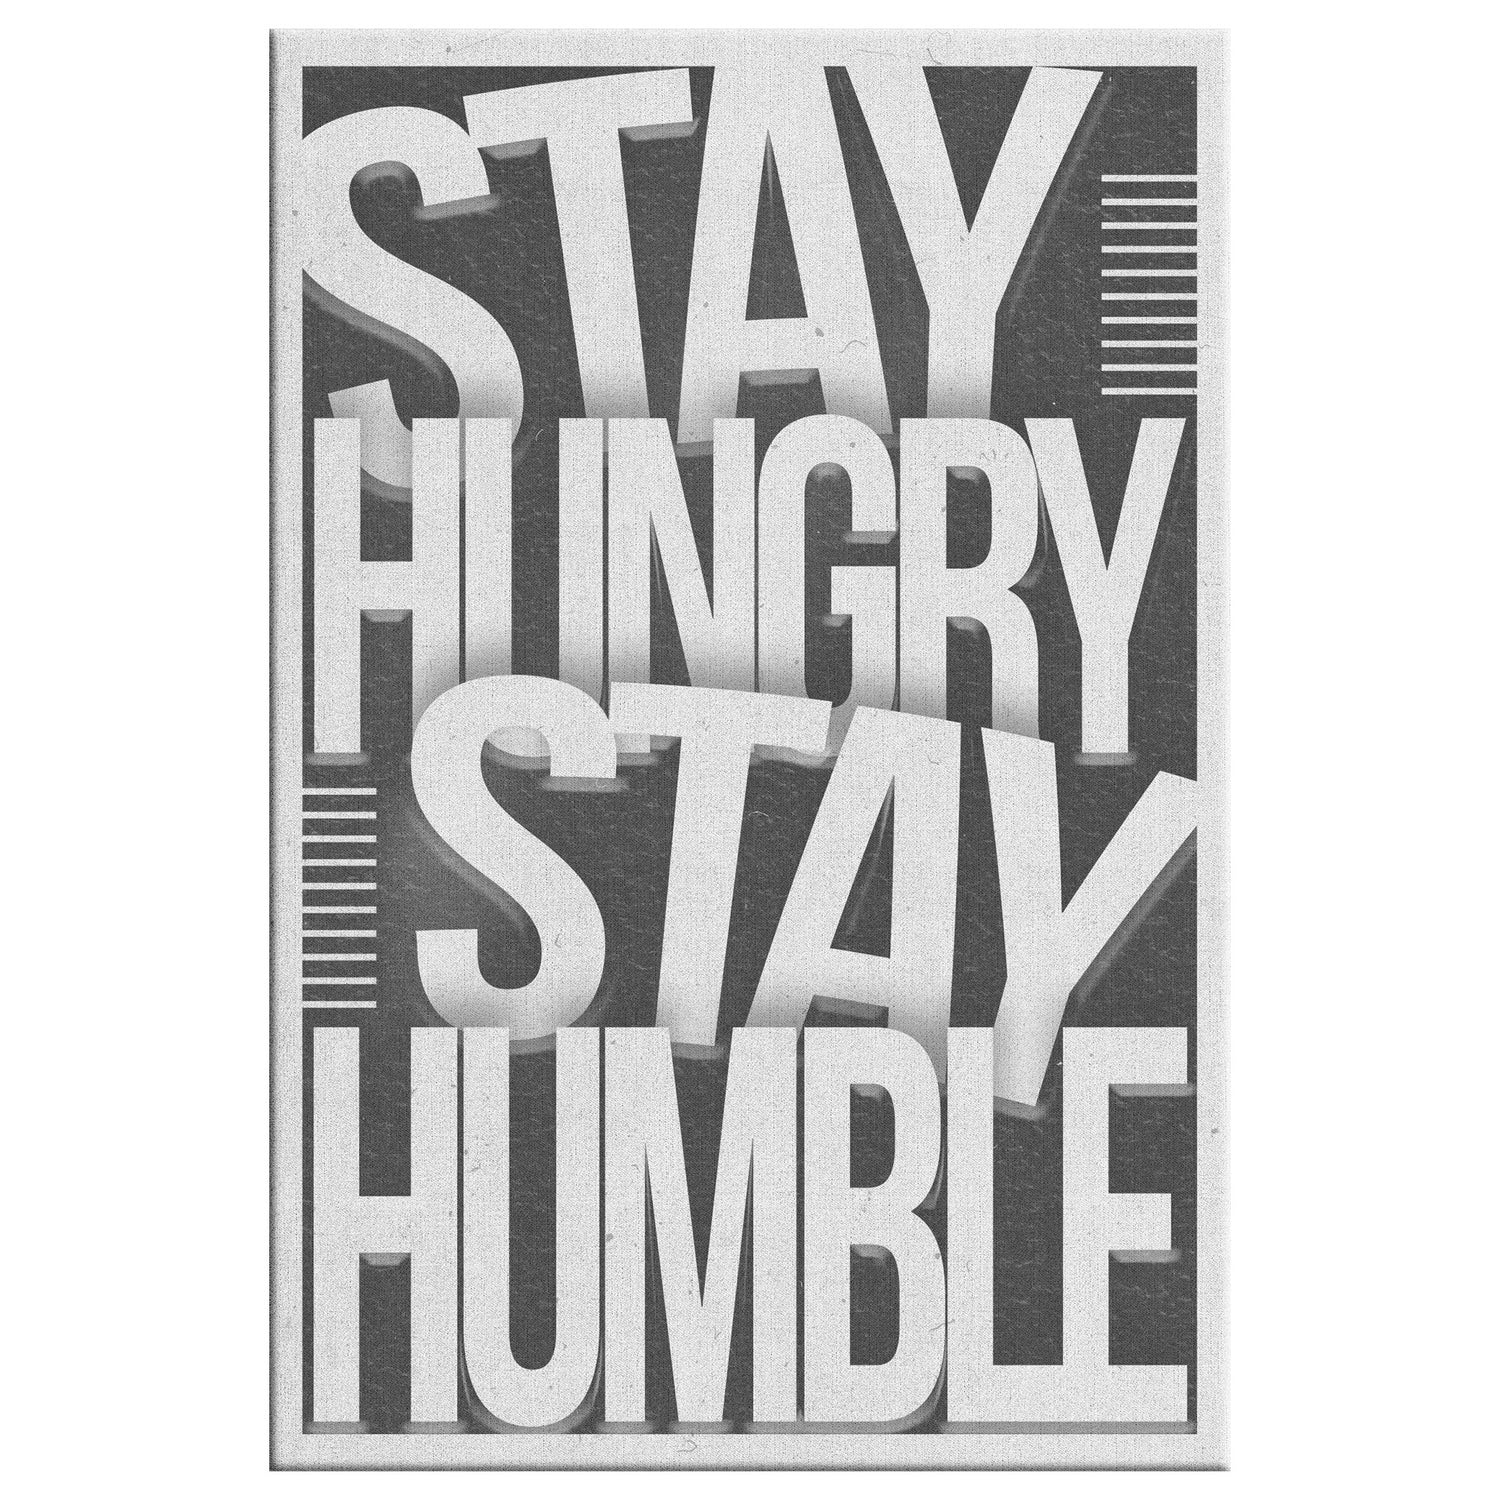 Stay humble wallpaper | Wallpaper, Stay humble, Neon signs